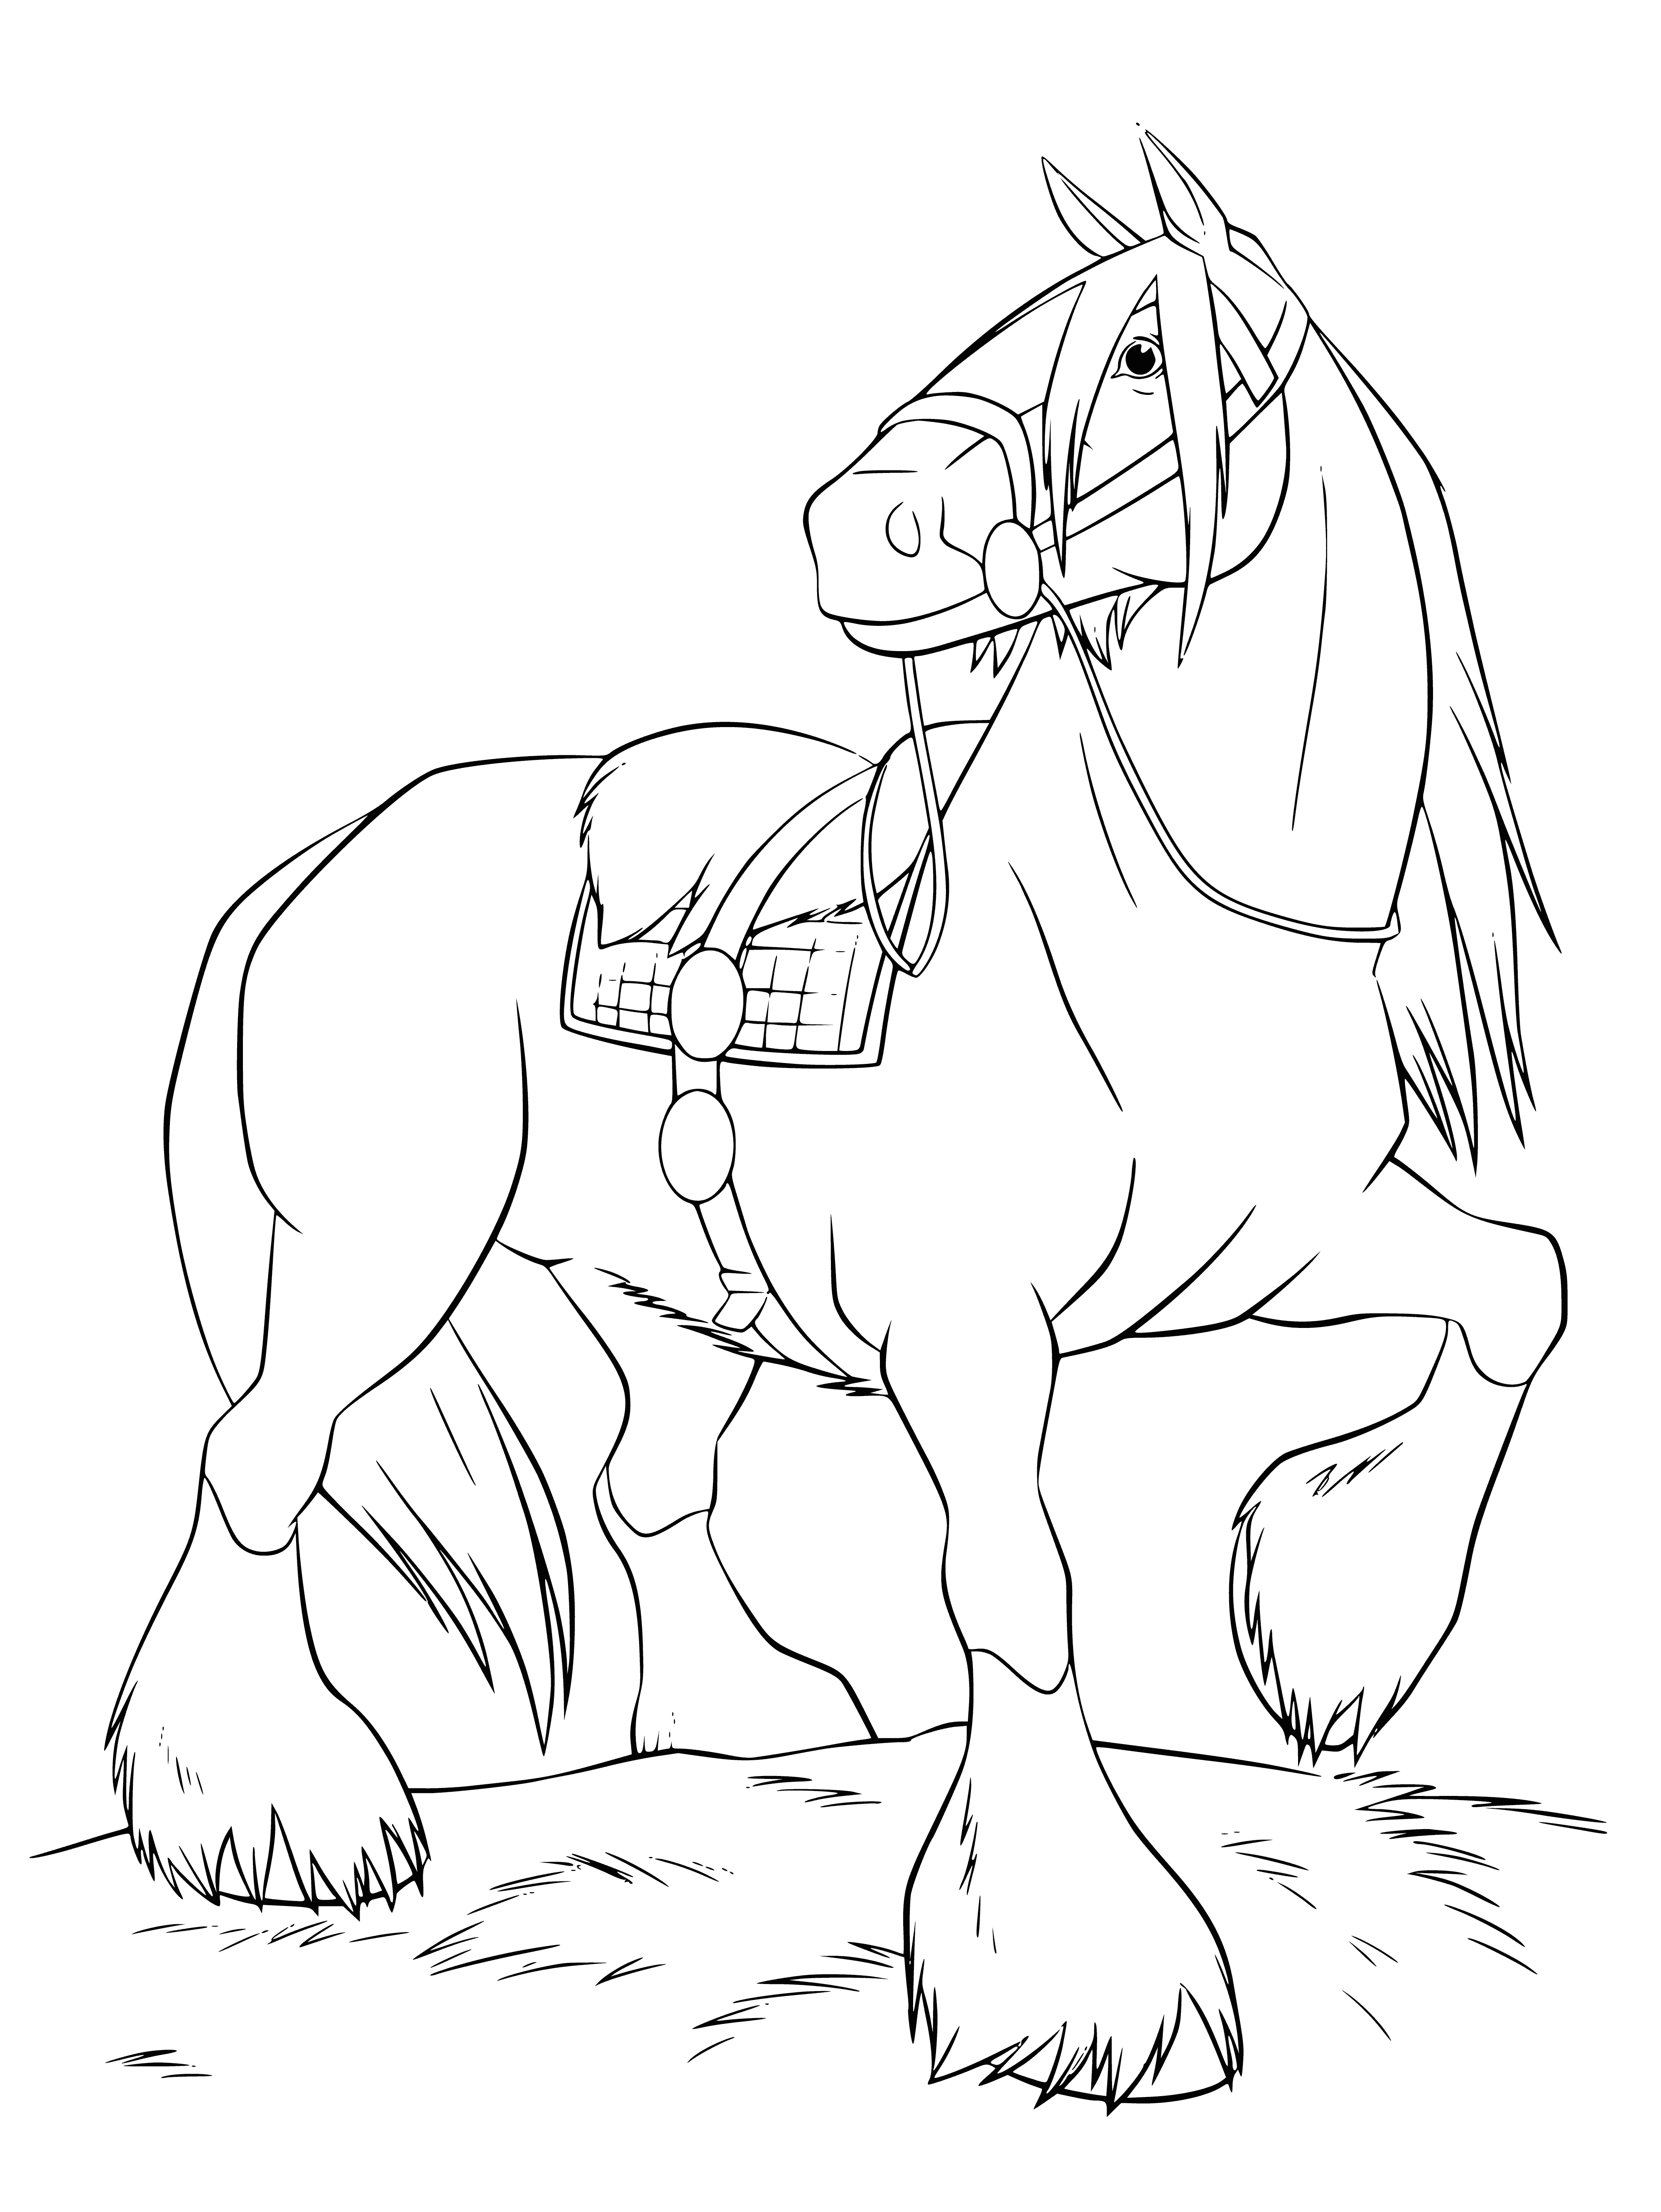 Merida's Horse - Angus coloring page